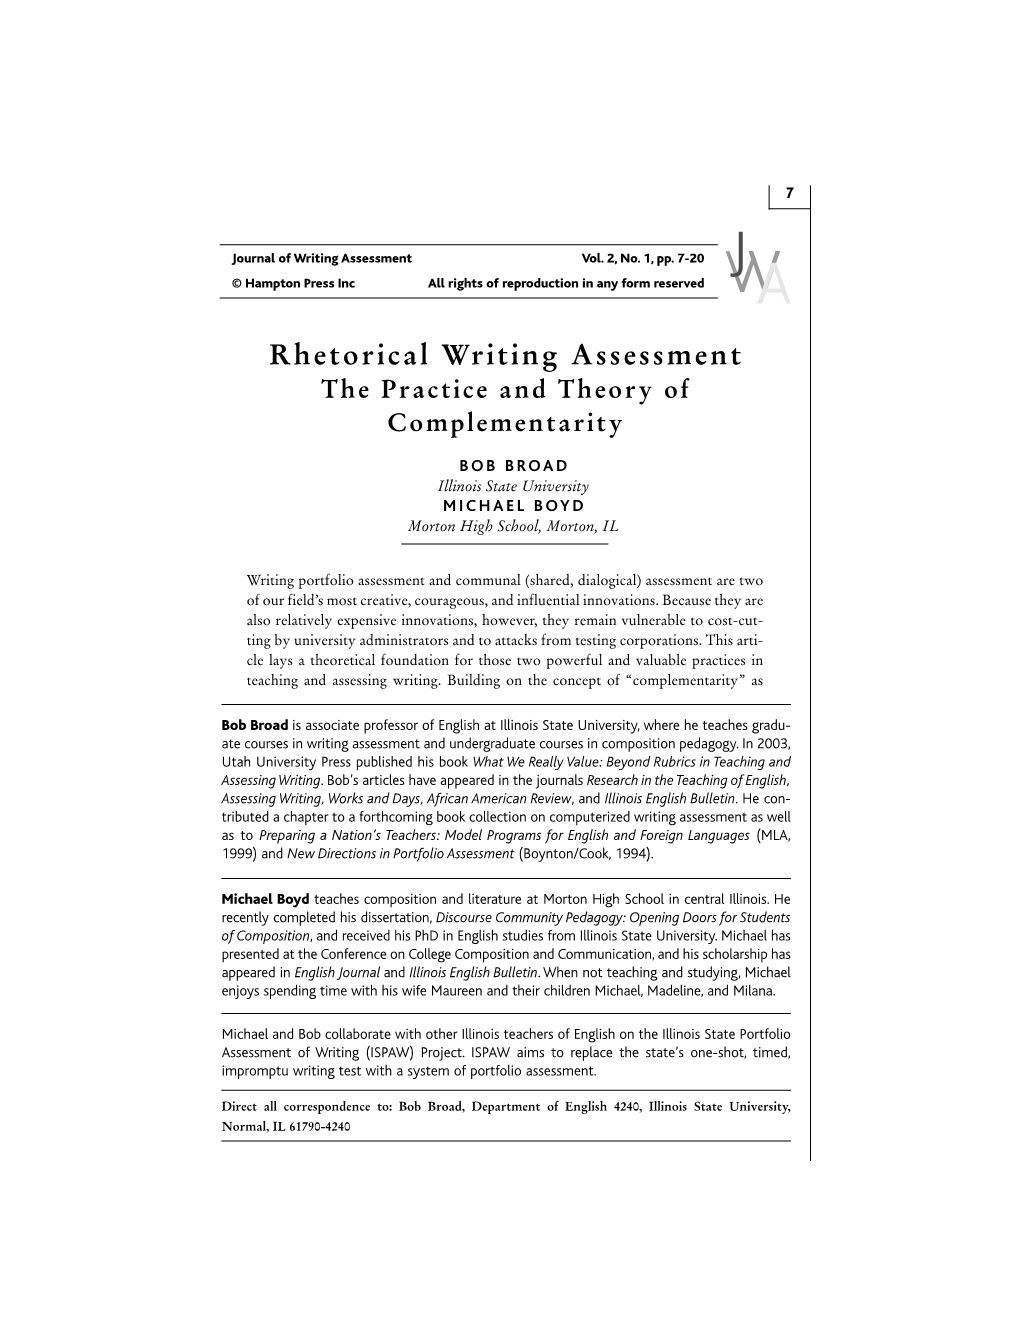 Rhetorical Writing Assessment the Practice and Theory of Complementarity